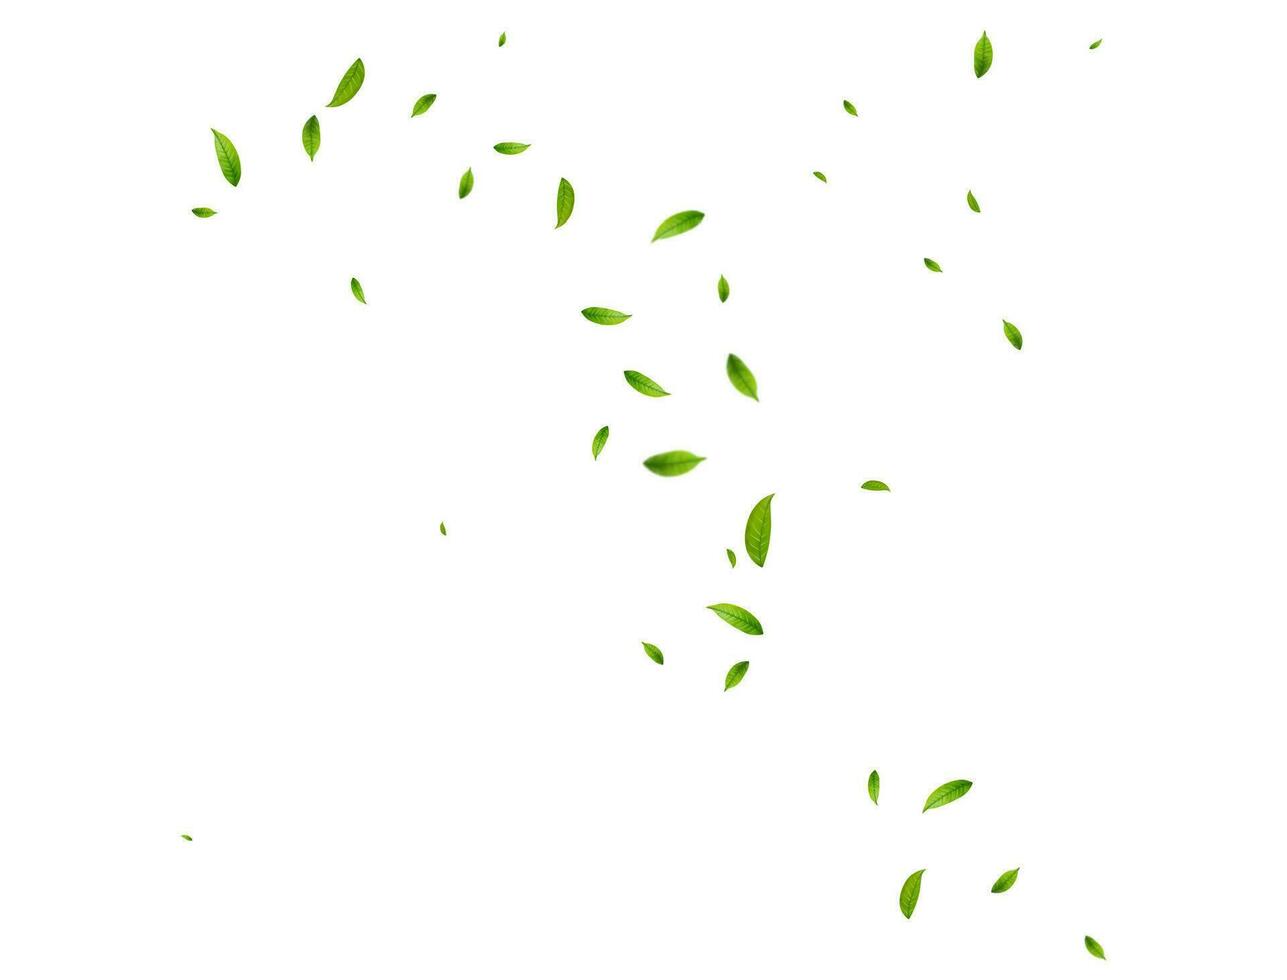 Realistic green tea leaves in motion vector